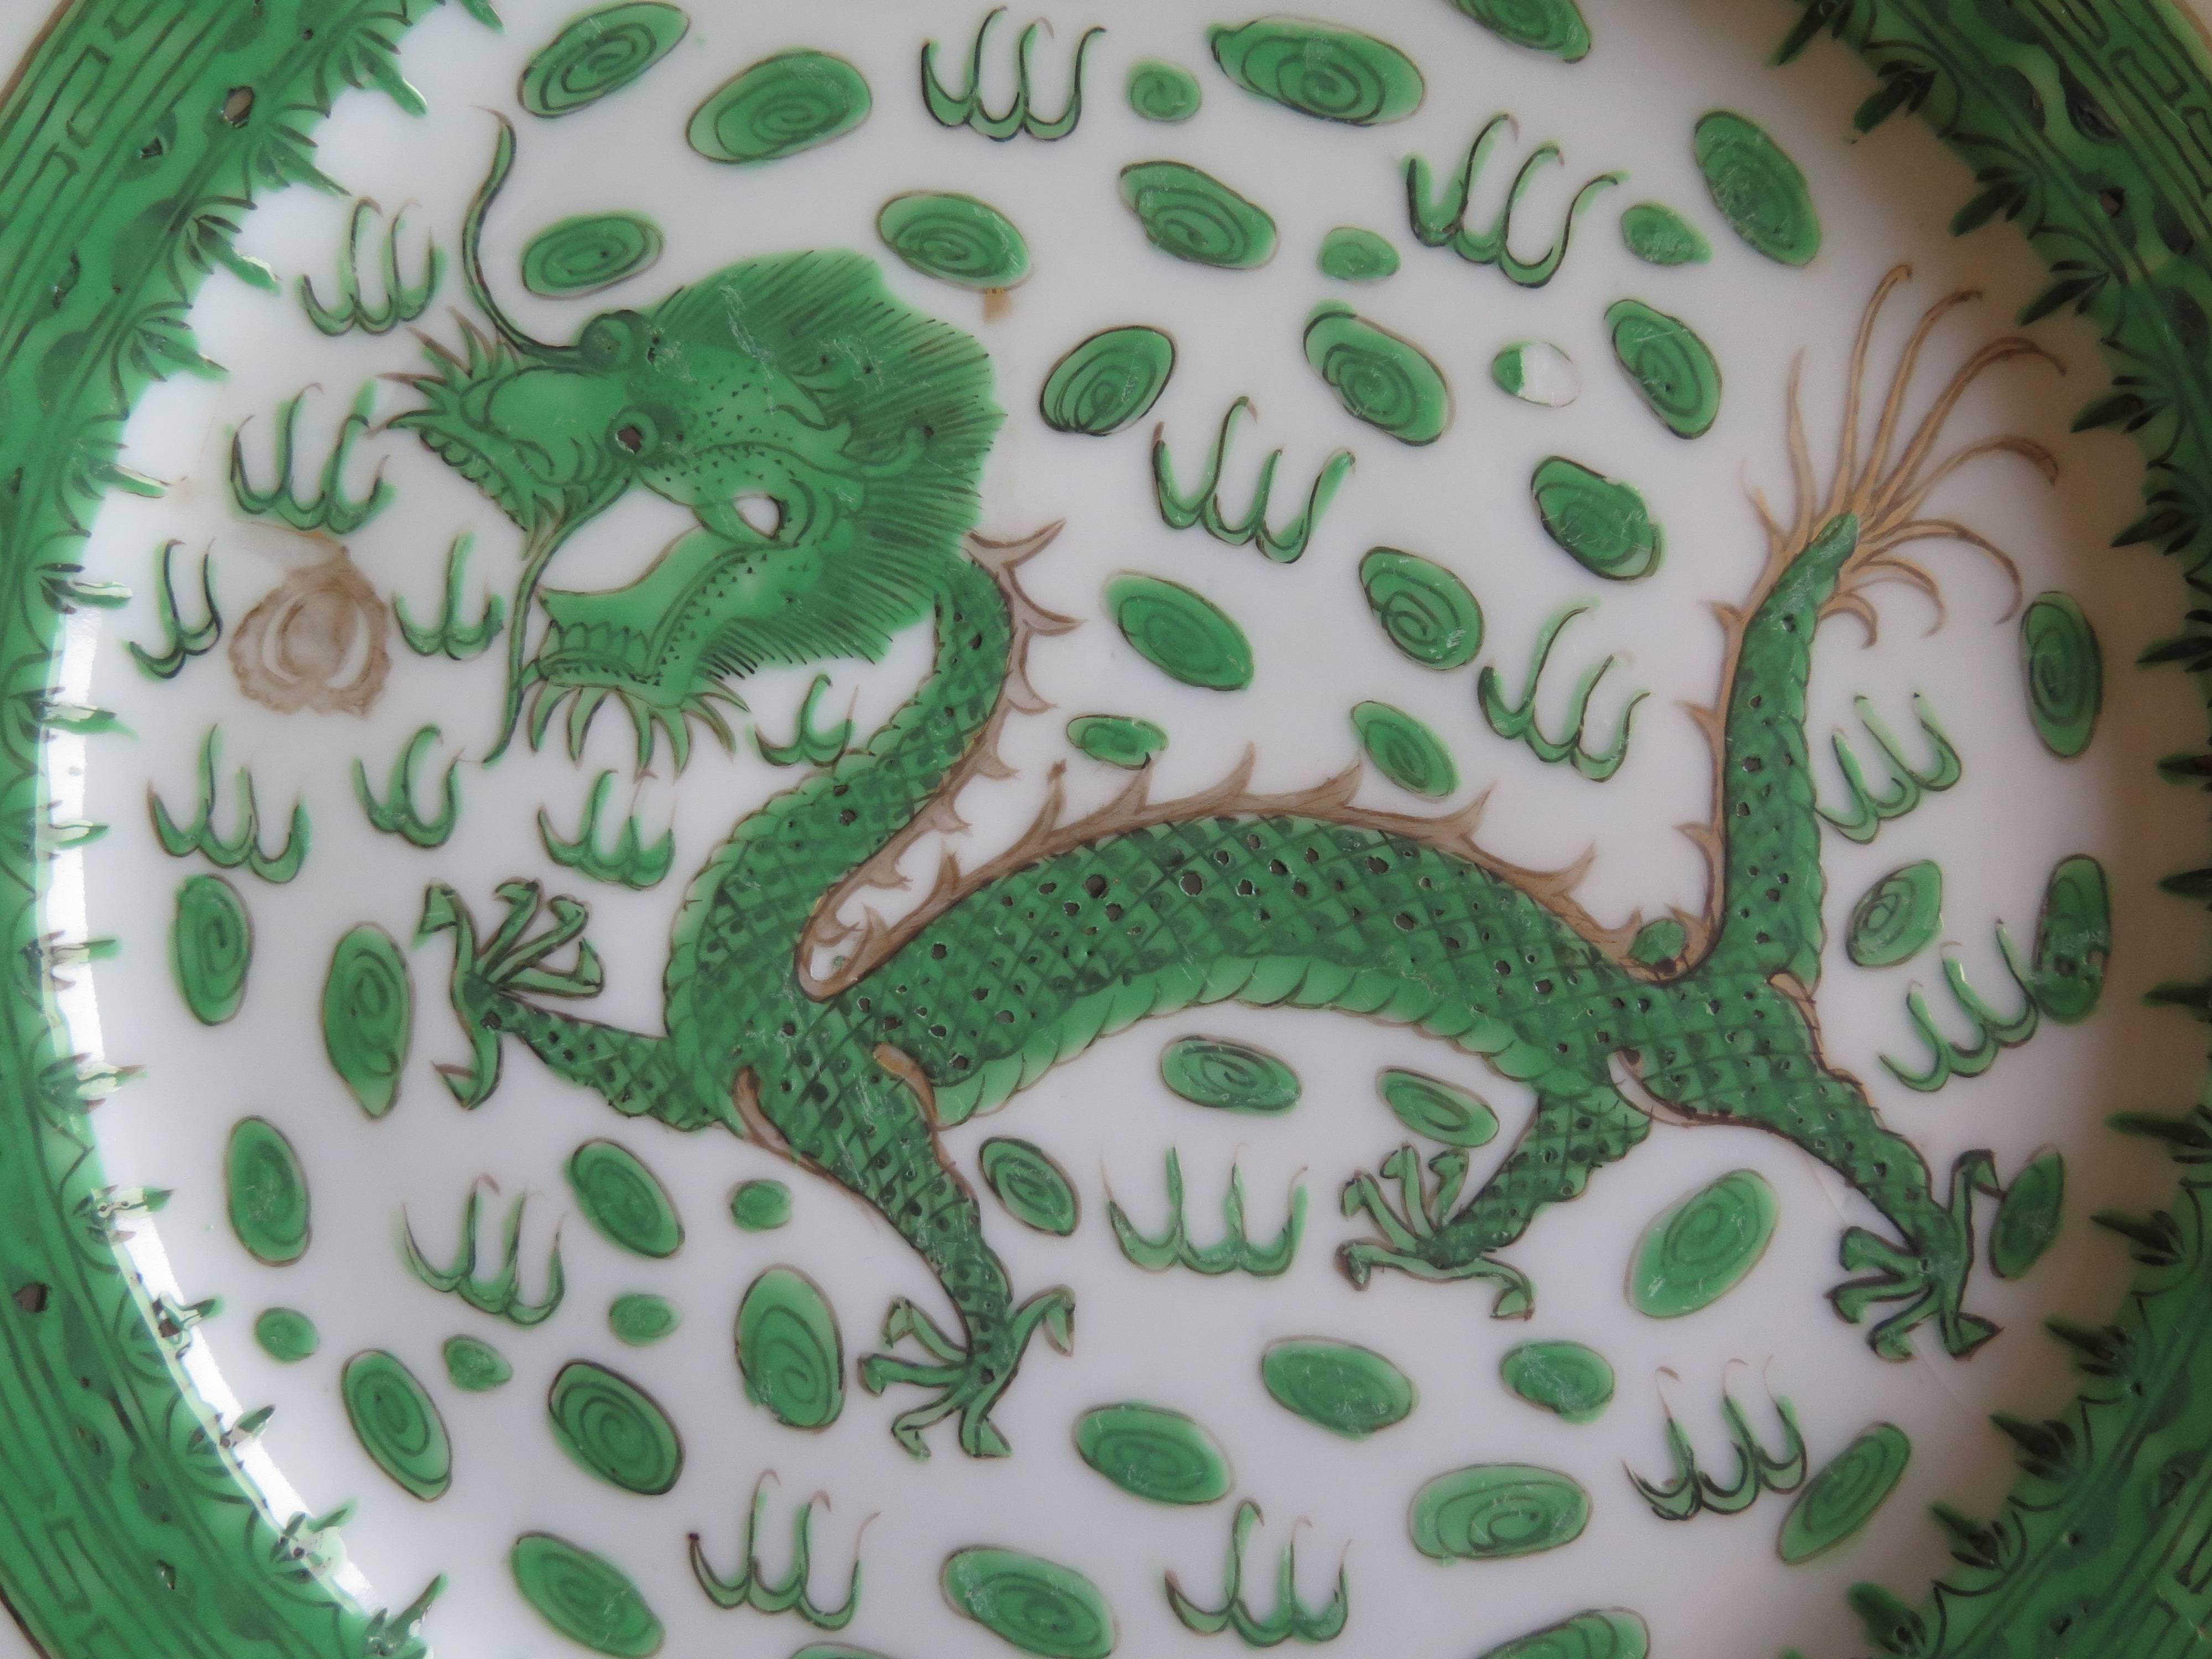 This is a beautiful Chinese porcelain plate from the early 19th century of the Qing dynasty, decorated in the Famille Verte (green) palette.

The circular plate has a fluted shaped rim and is finely potted with a very neatly trimmed foot. 

It